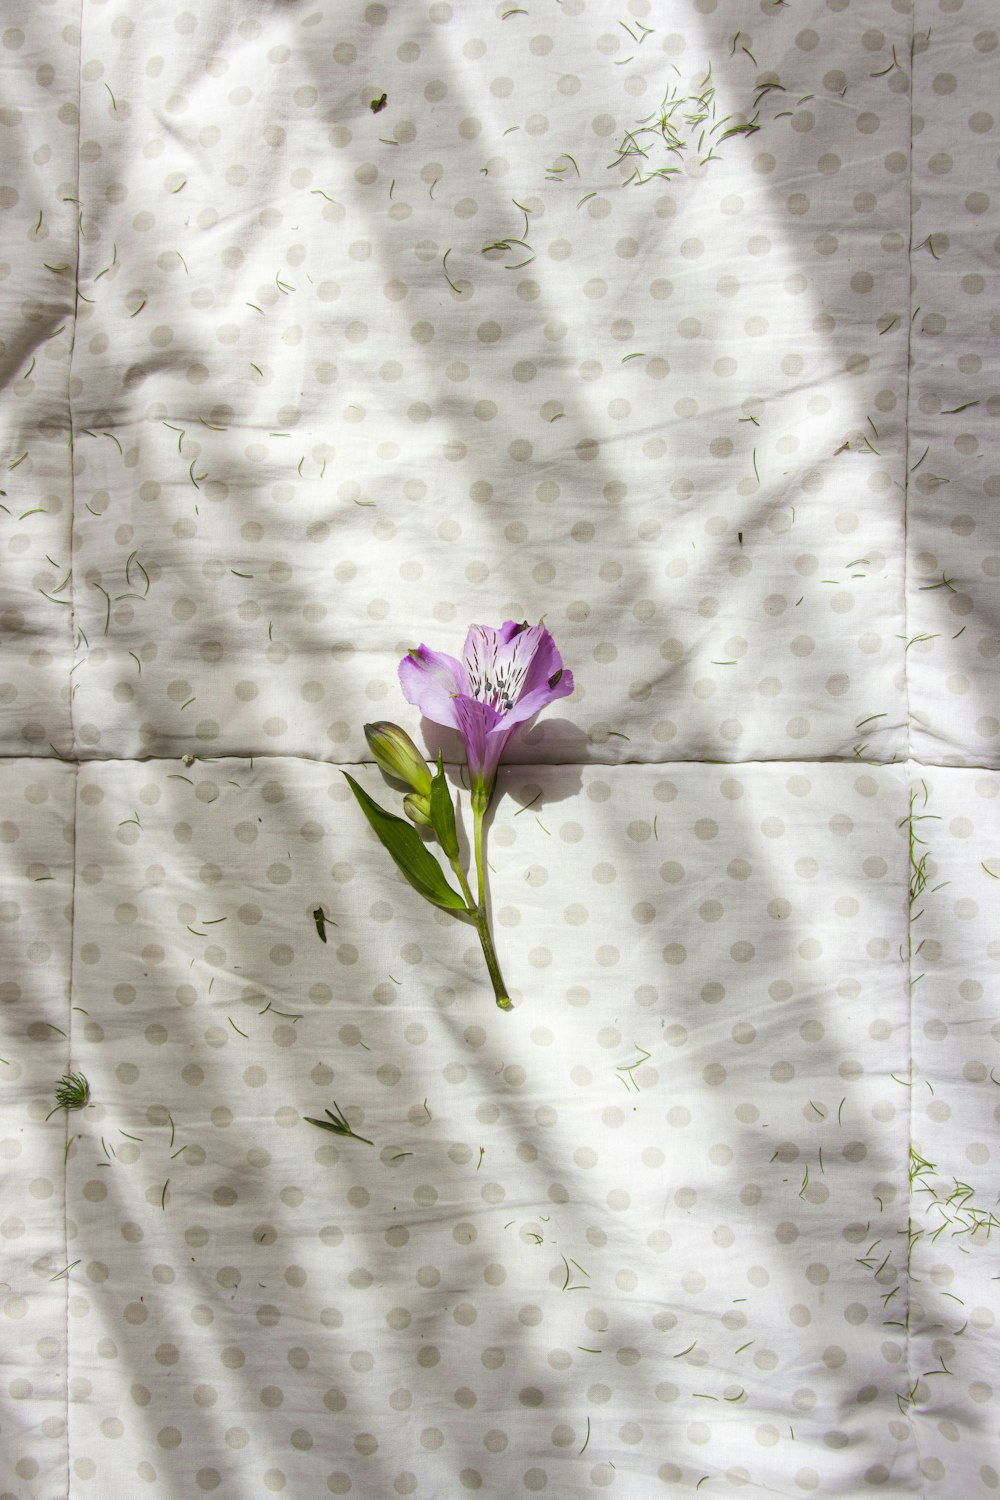 purple flower on white and gray textile